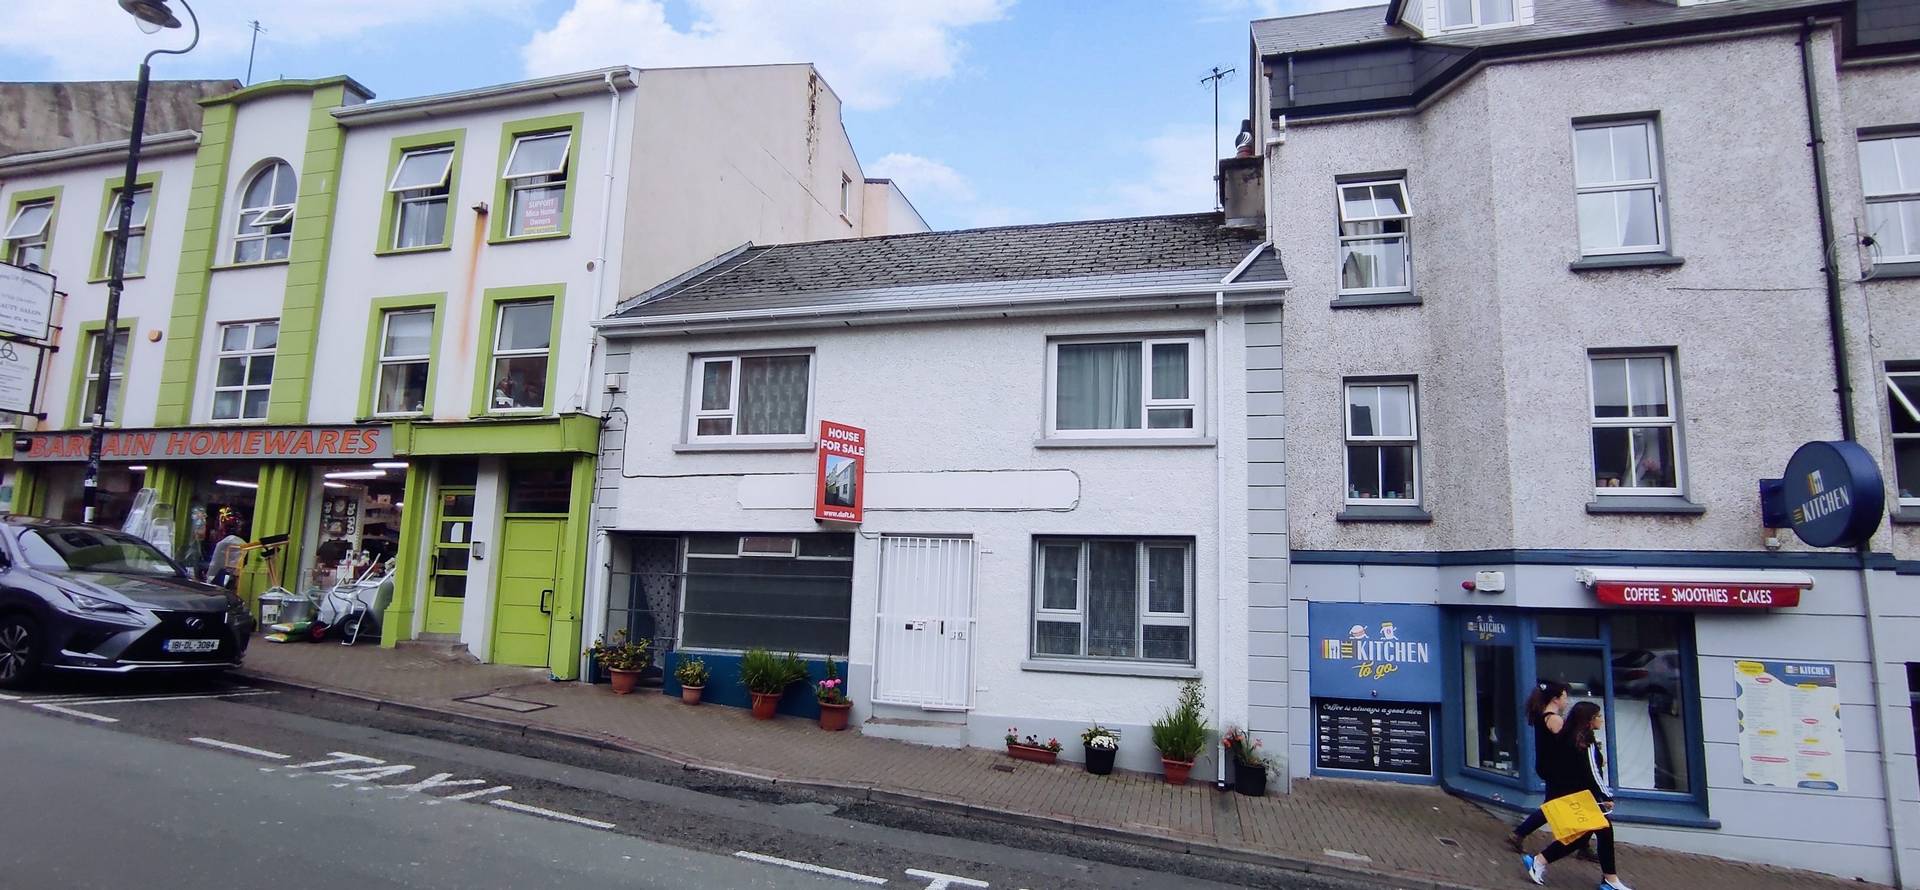 20 Lower Main Street, Letterkenny, Co., Donegal  F92 NW56